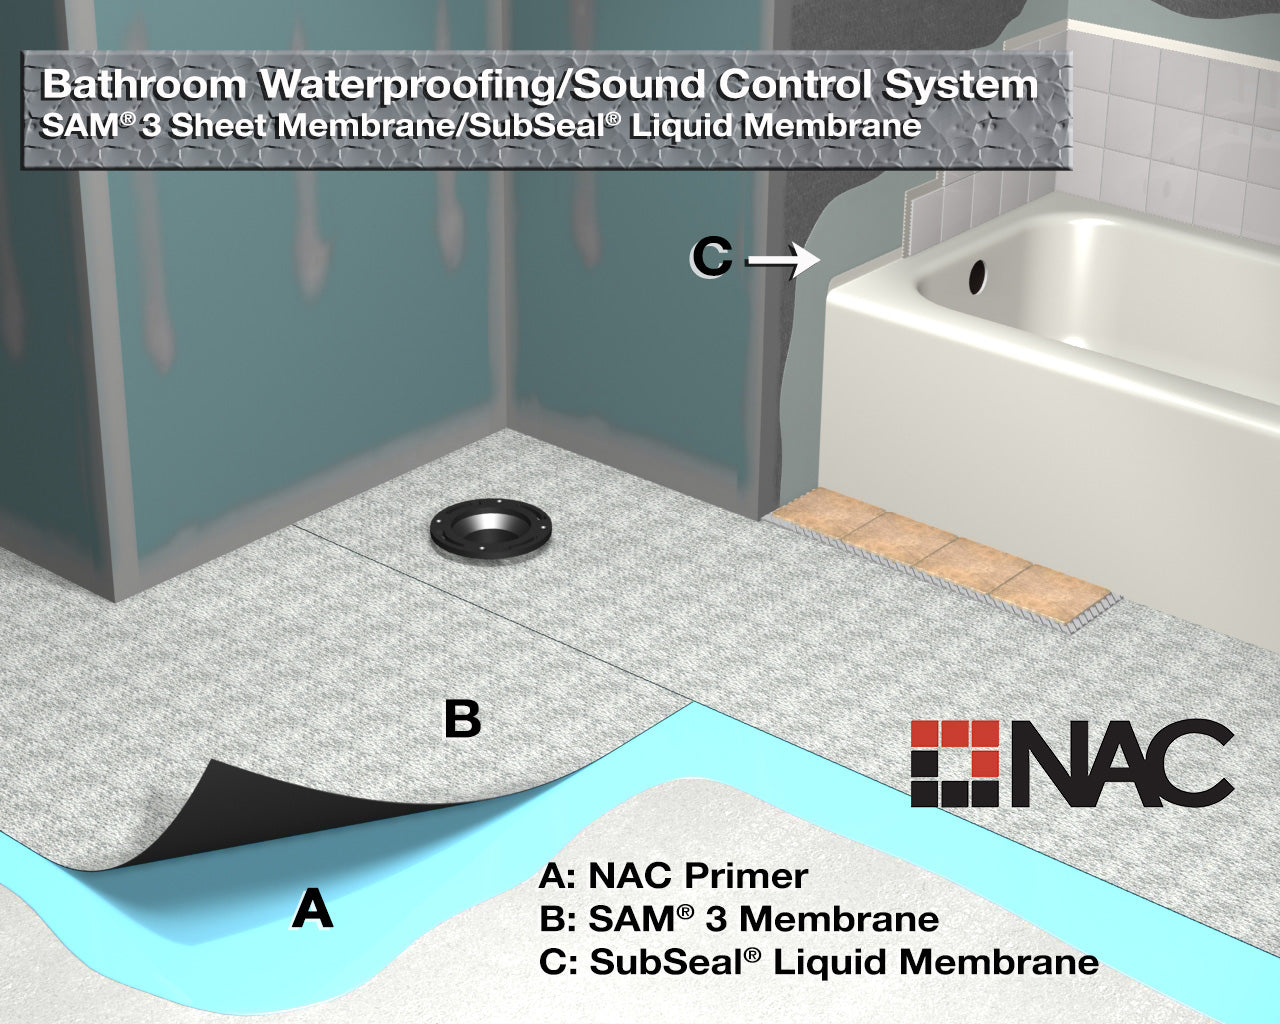 Basic bathroom installation system utilizing SAM 3 and SubSeal for projects requiring sound control and waterproofing protection.